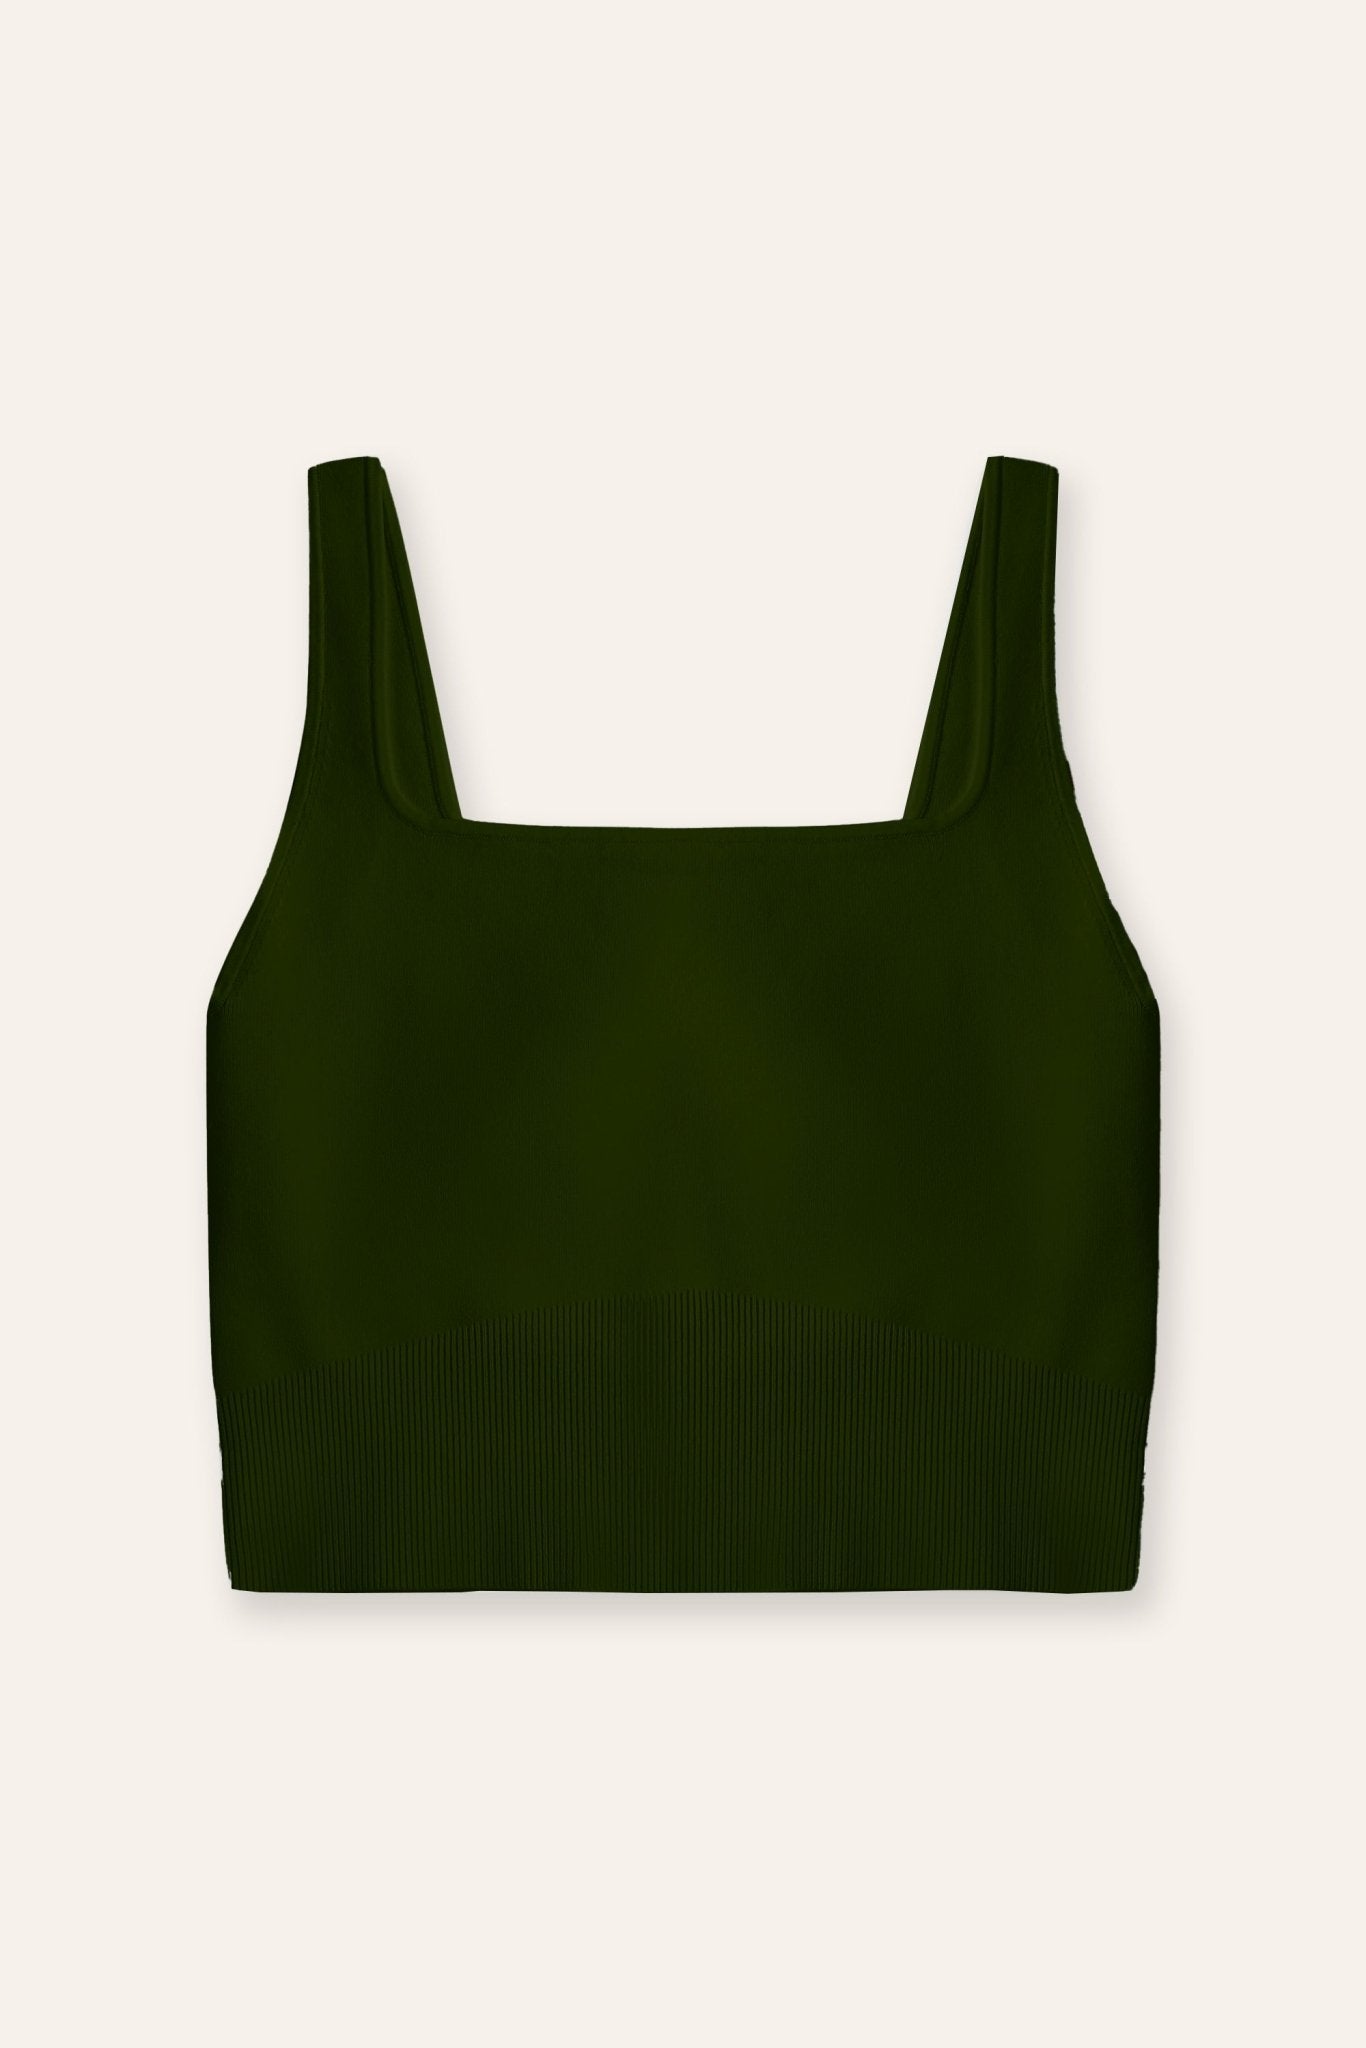 ROSEMARY jersey knit top (Olive) - STELLAM